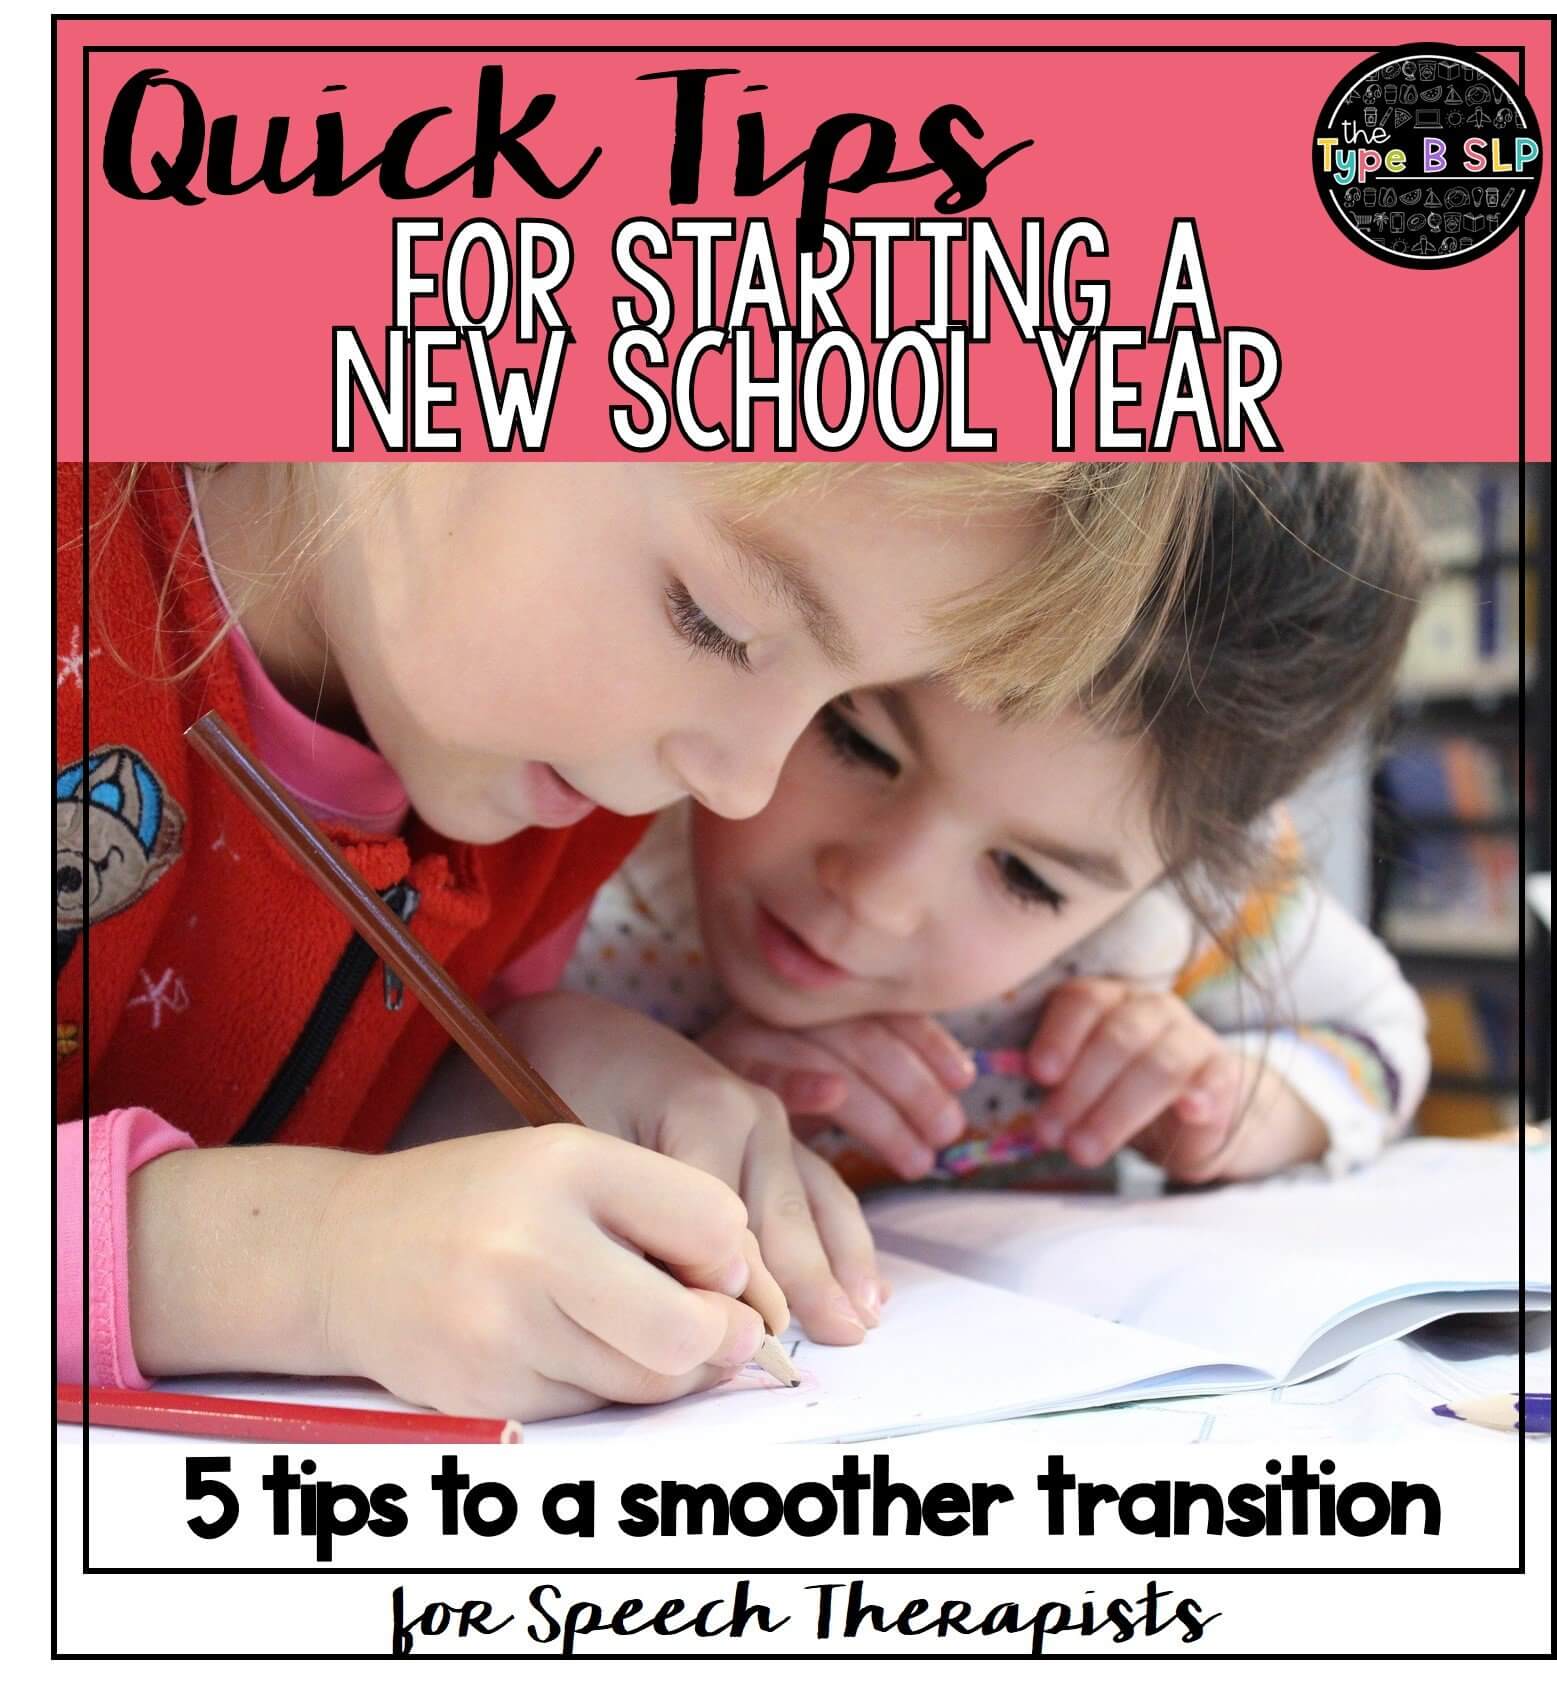 Quick Tips for Starting a New School Year: SLP Edition